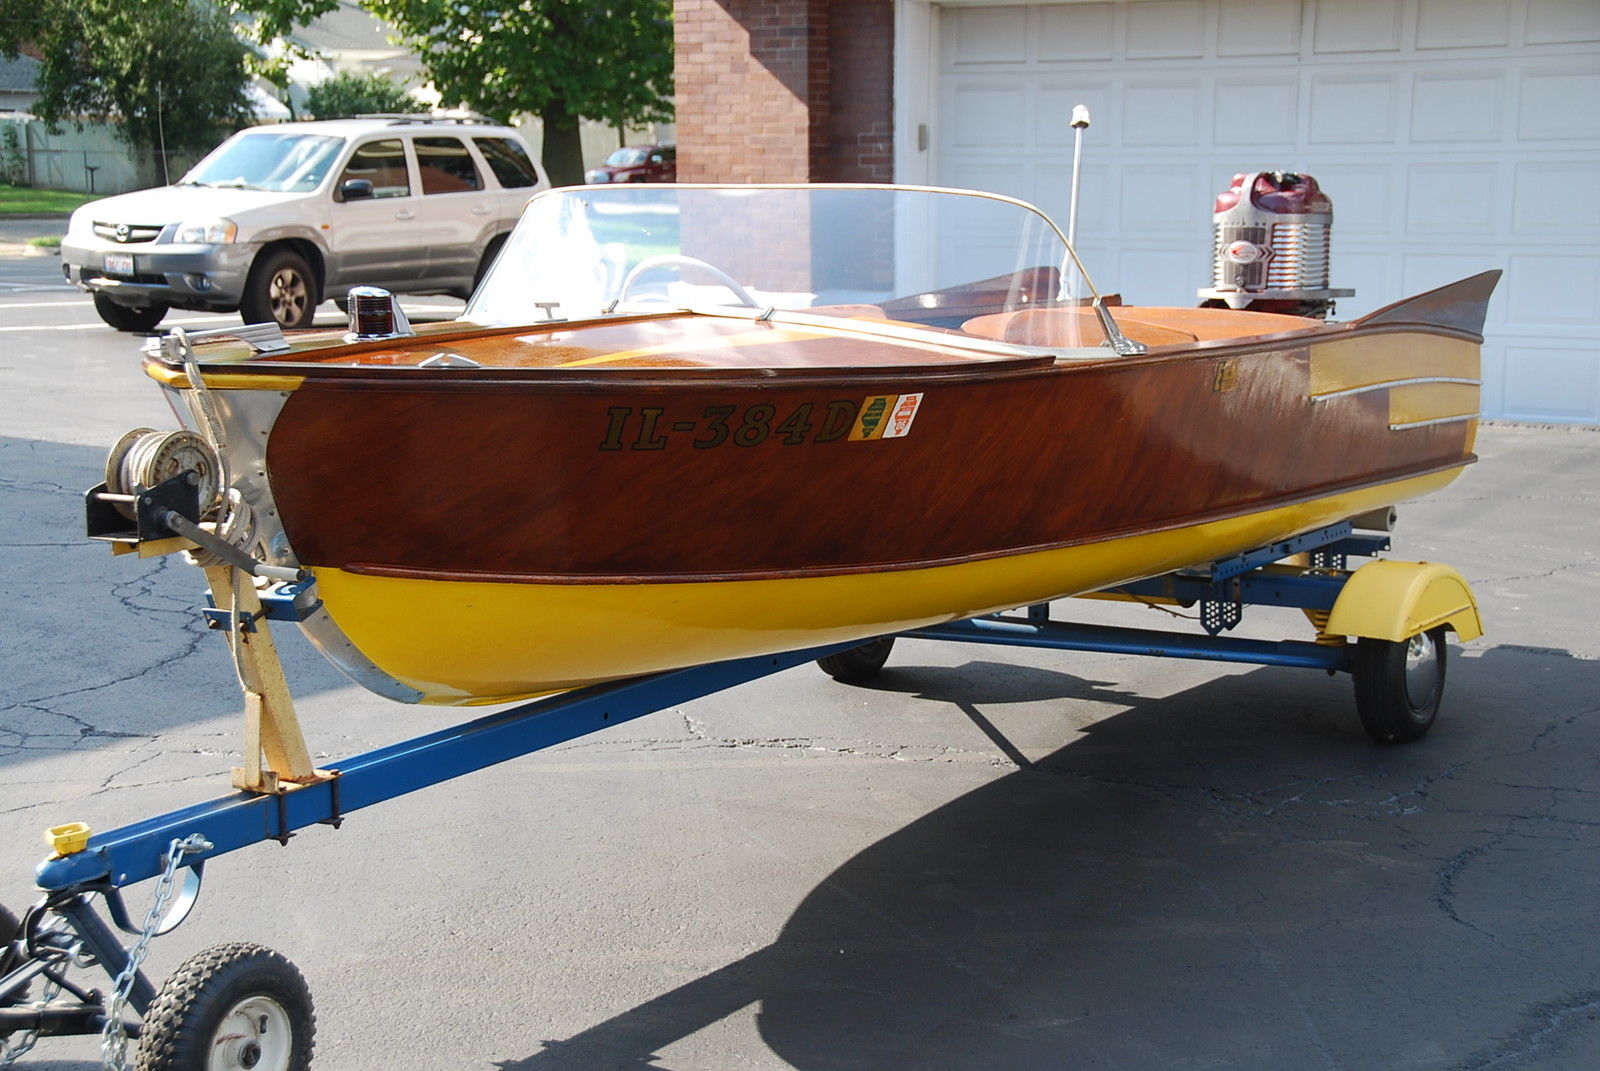 Yellow Jacket Riviera 1958 for sale for $4,900 - Boats-from-USA.com